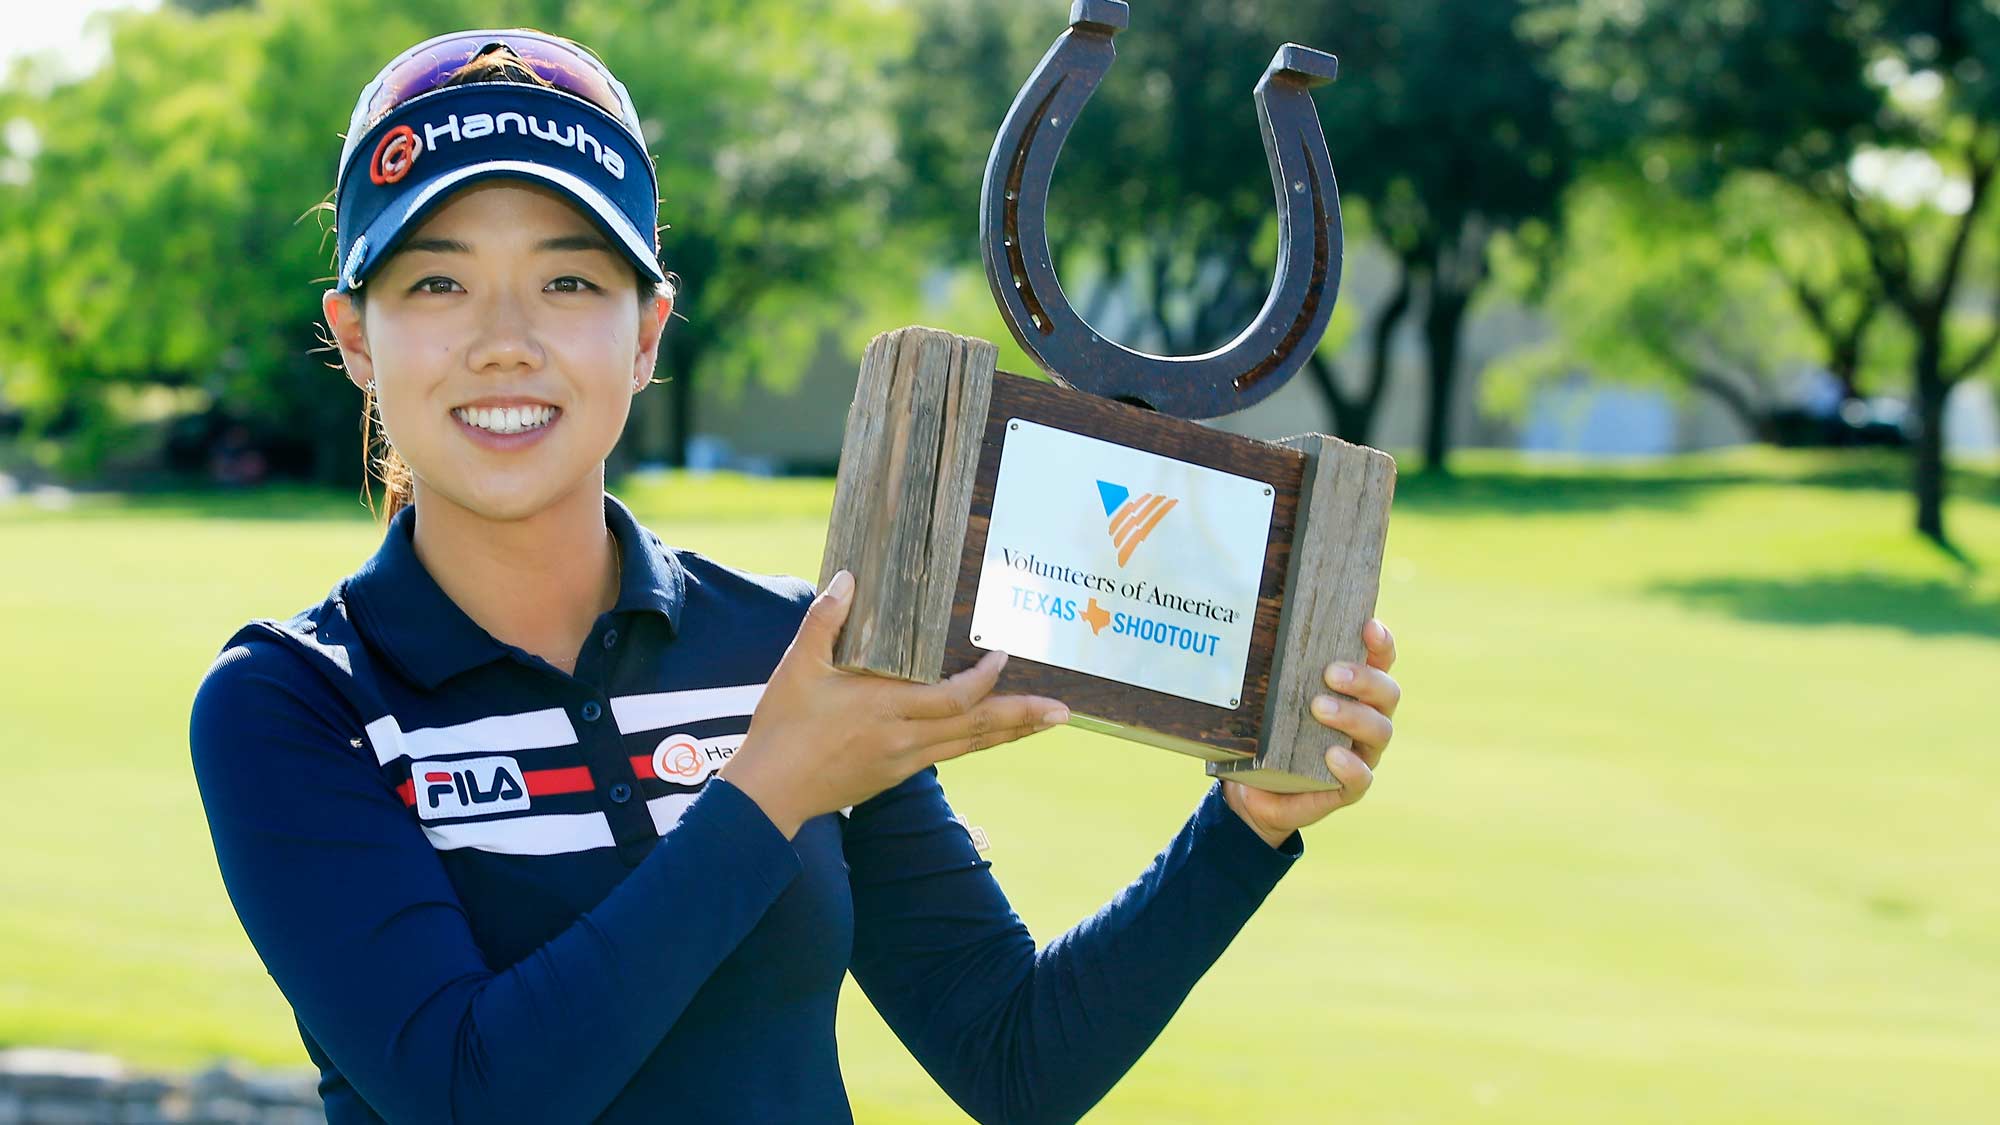 Jenny Shin poses with the trophy after her two-stroke victory at the Volunteers of America Texas Shootout